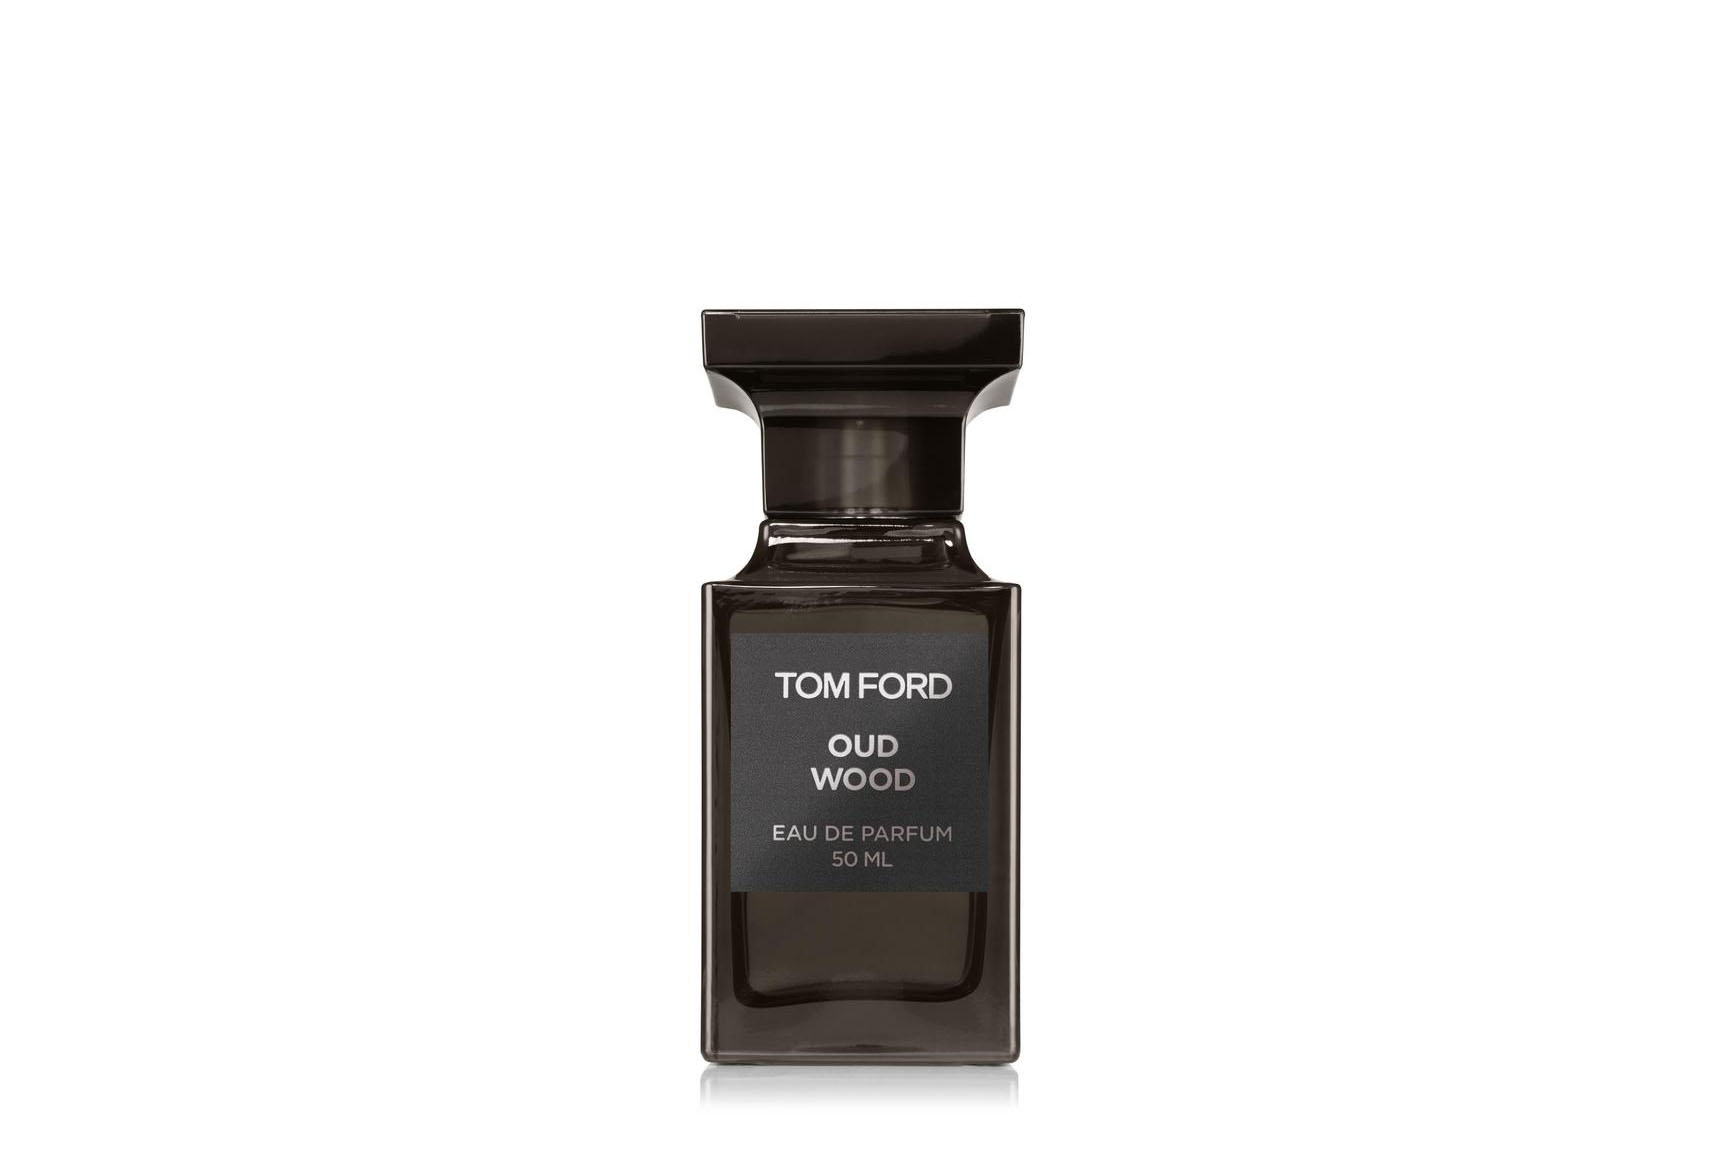 The Best Tom Ford Colognes for Men To Wear In 2021 - The Manual